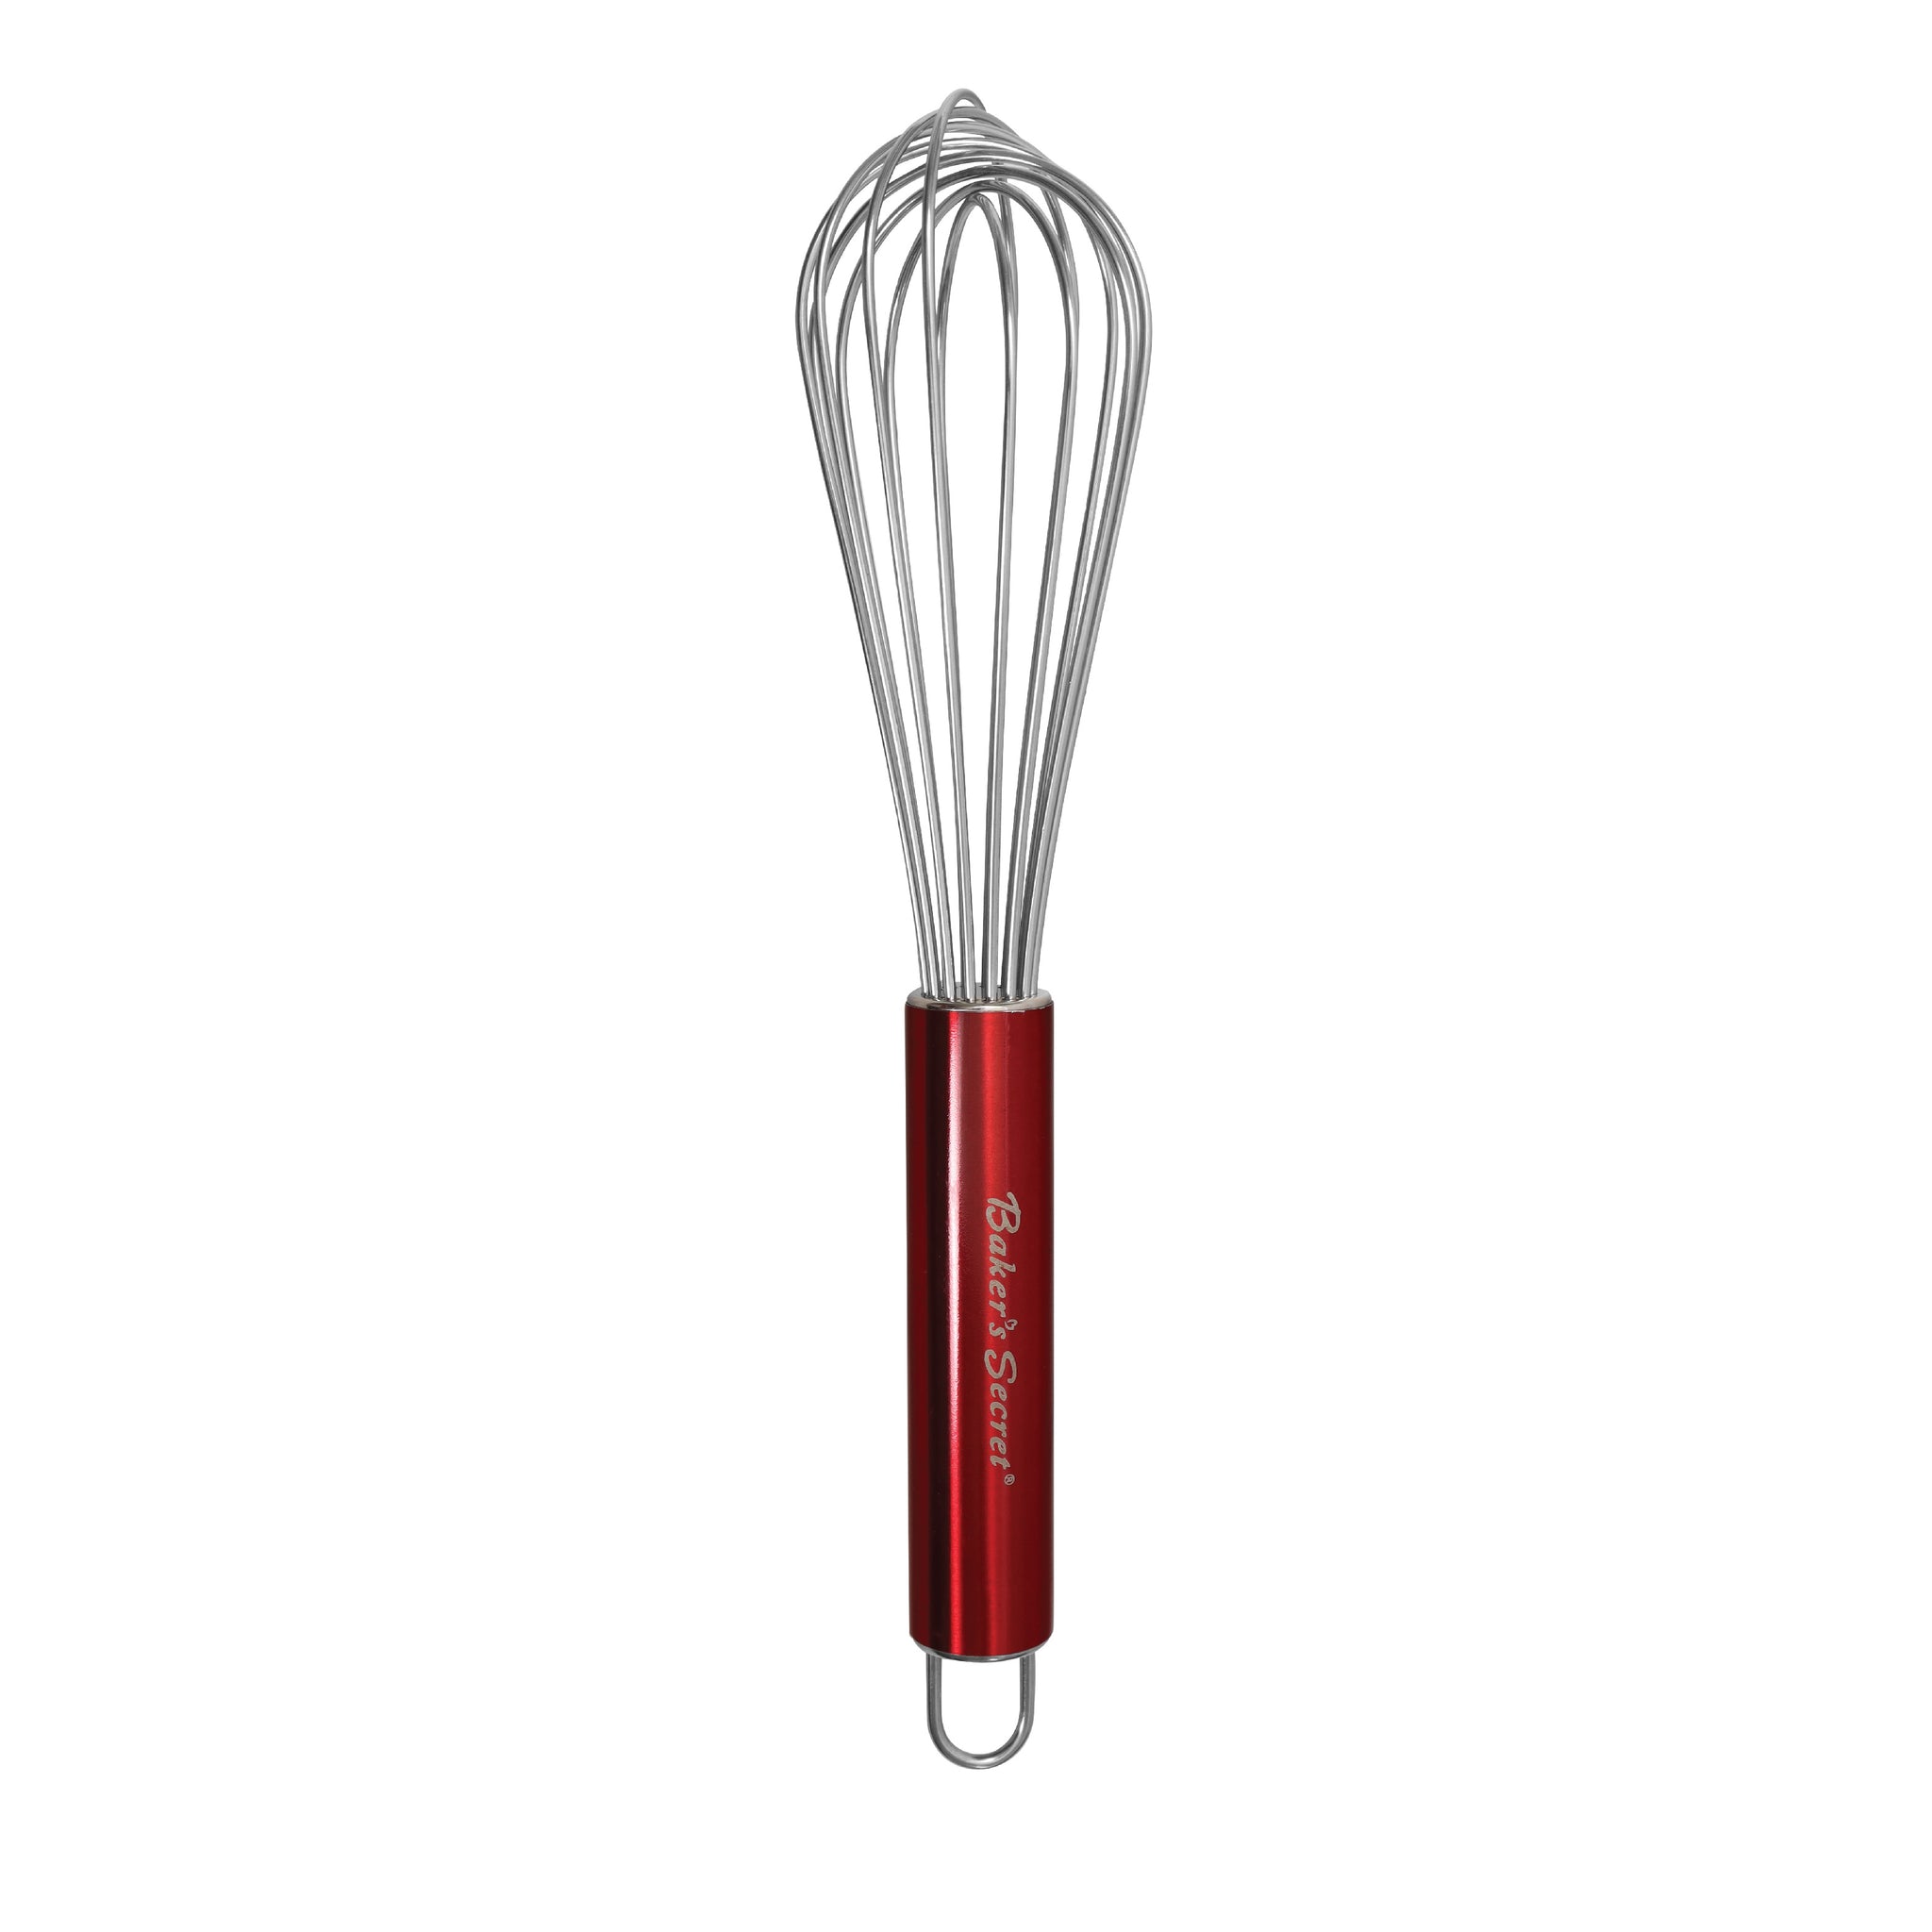 Stainless Steel Whisks 10" / Red Cookware Accessories - Baker's Secret